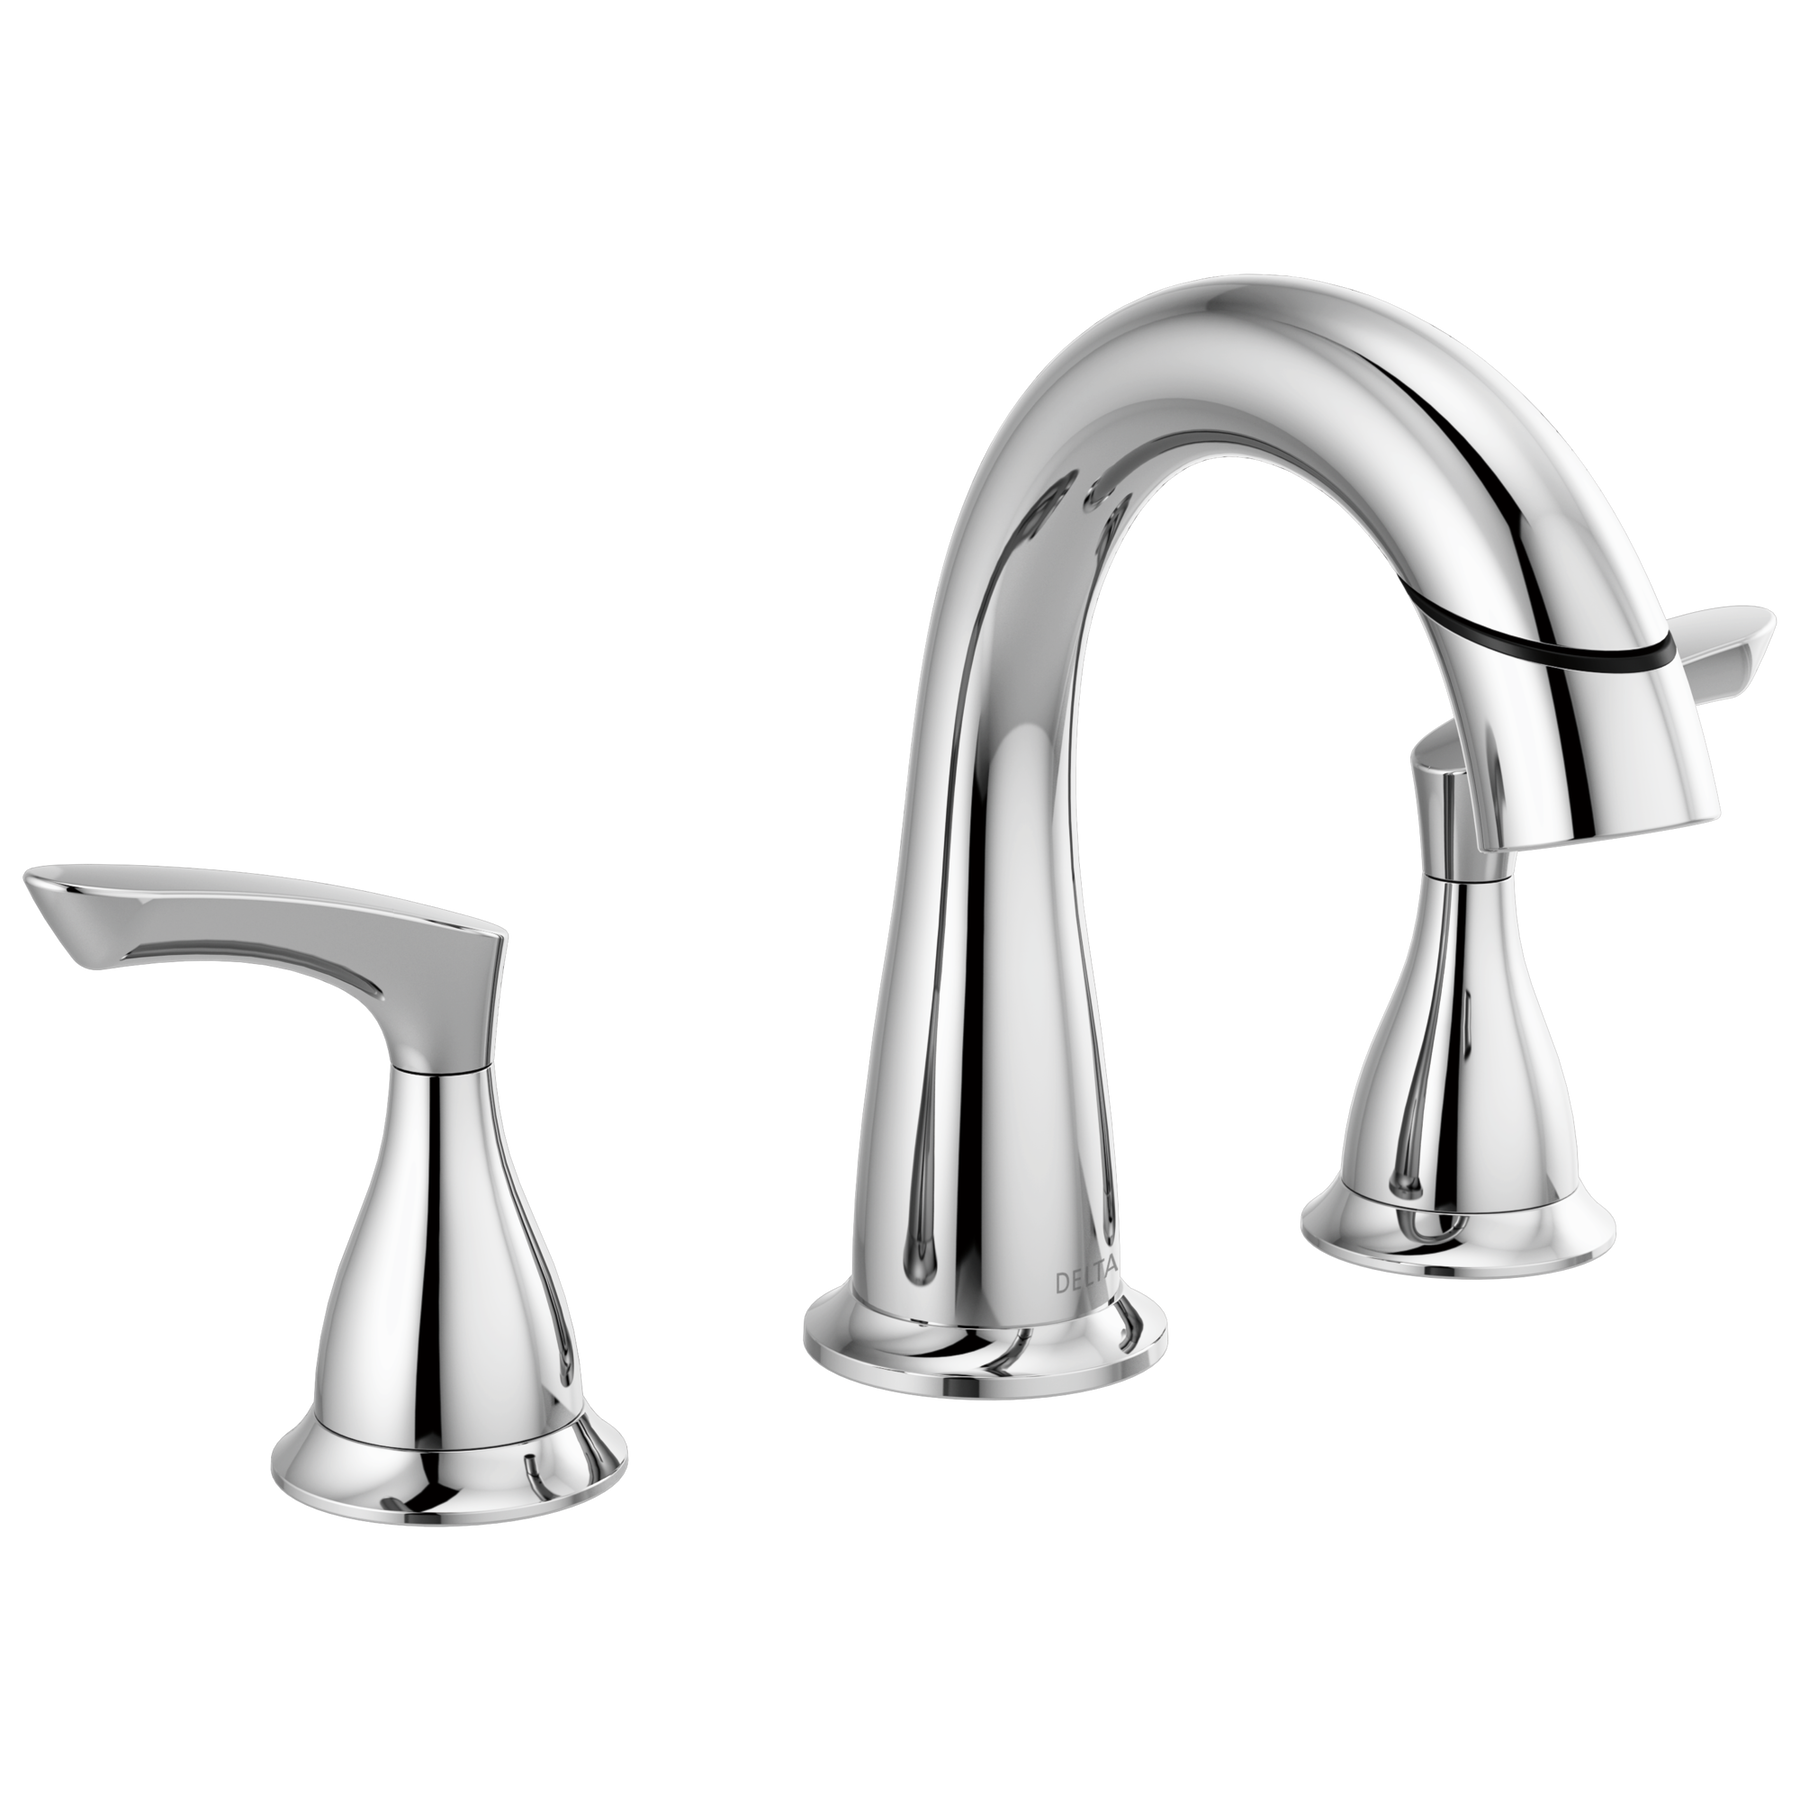 Two Handle Widespread Pull-Down Bathroom Faucet in Chrome